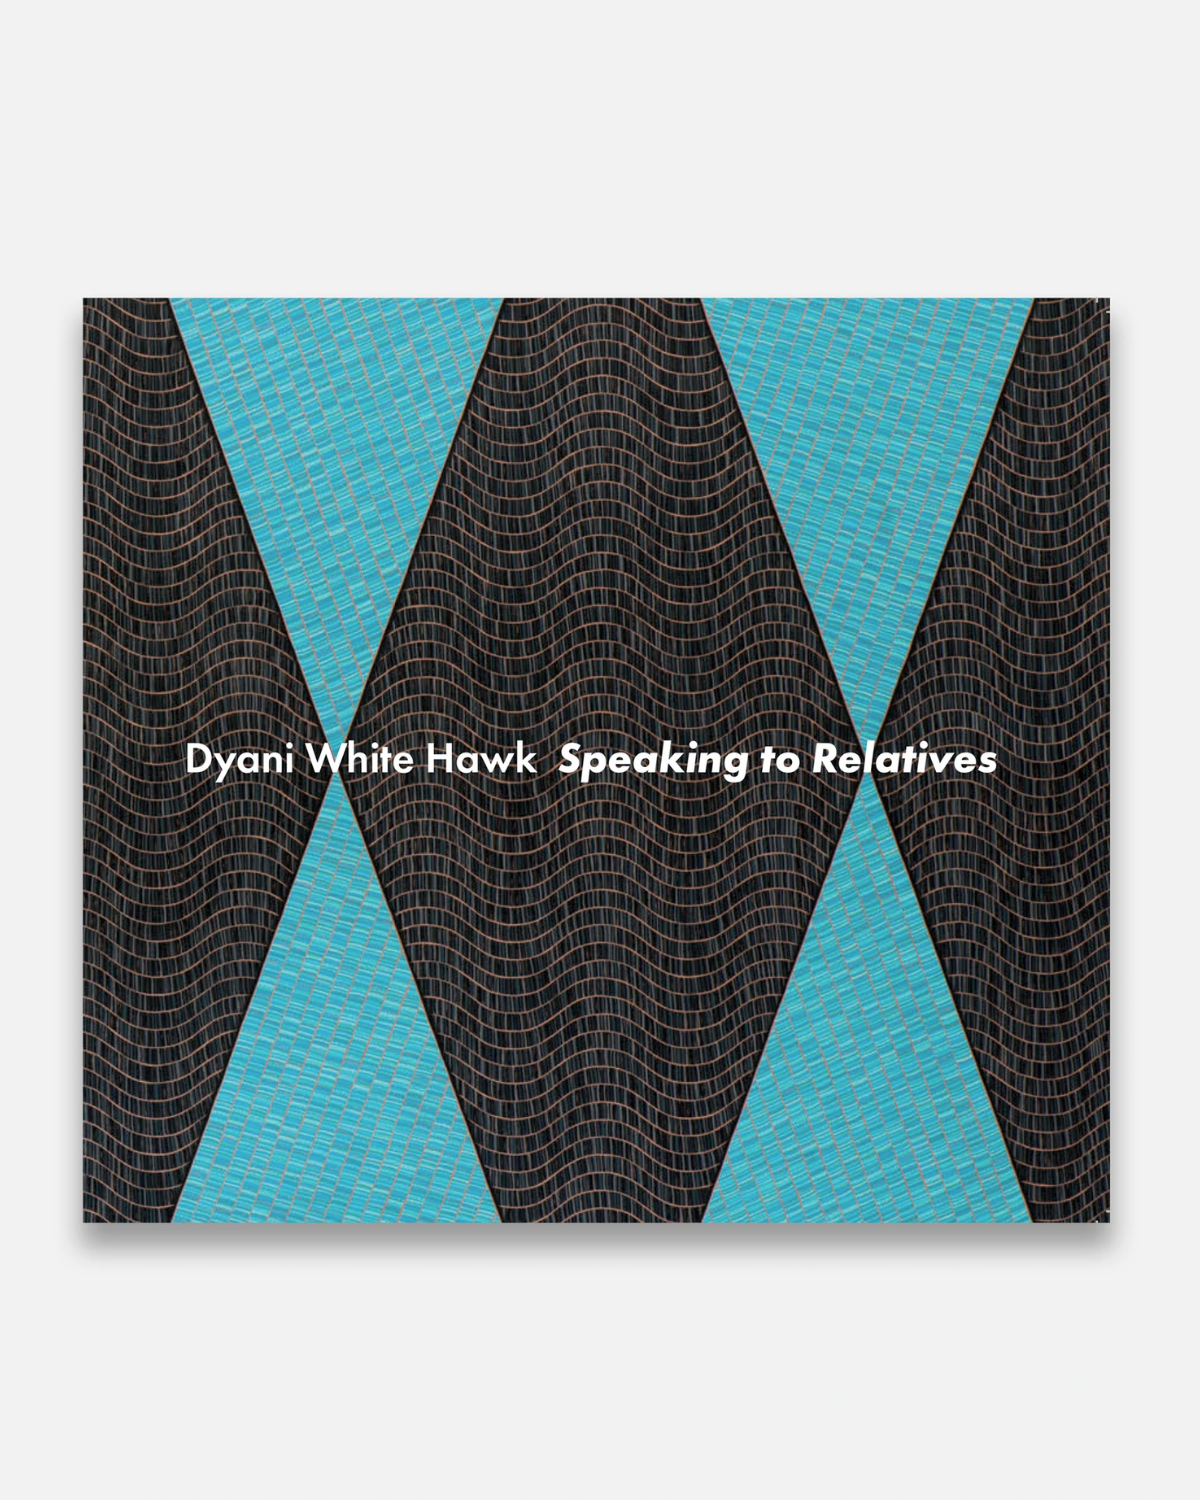 Exhibition catalogue photographed on a white background. White text on the center of the catalogue reads, “Dyani White Hawk Speaking to Relatives.” The catalogue cover art is made up of large triangles in blue and large diamond-like shapes in a brownish color.